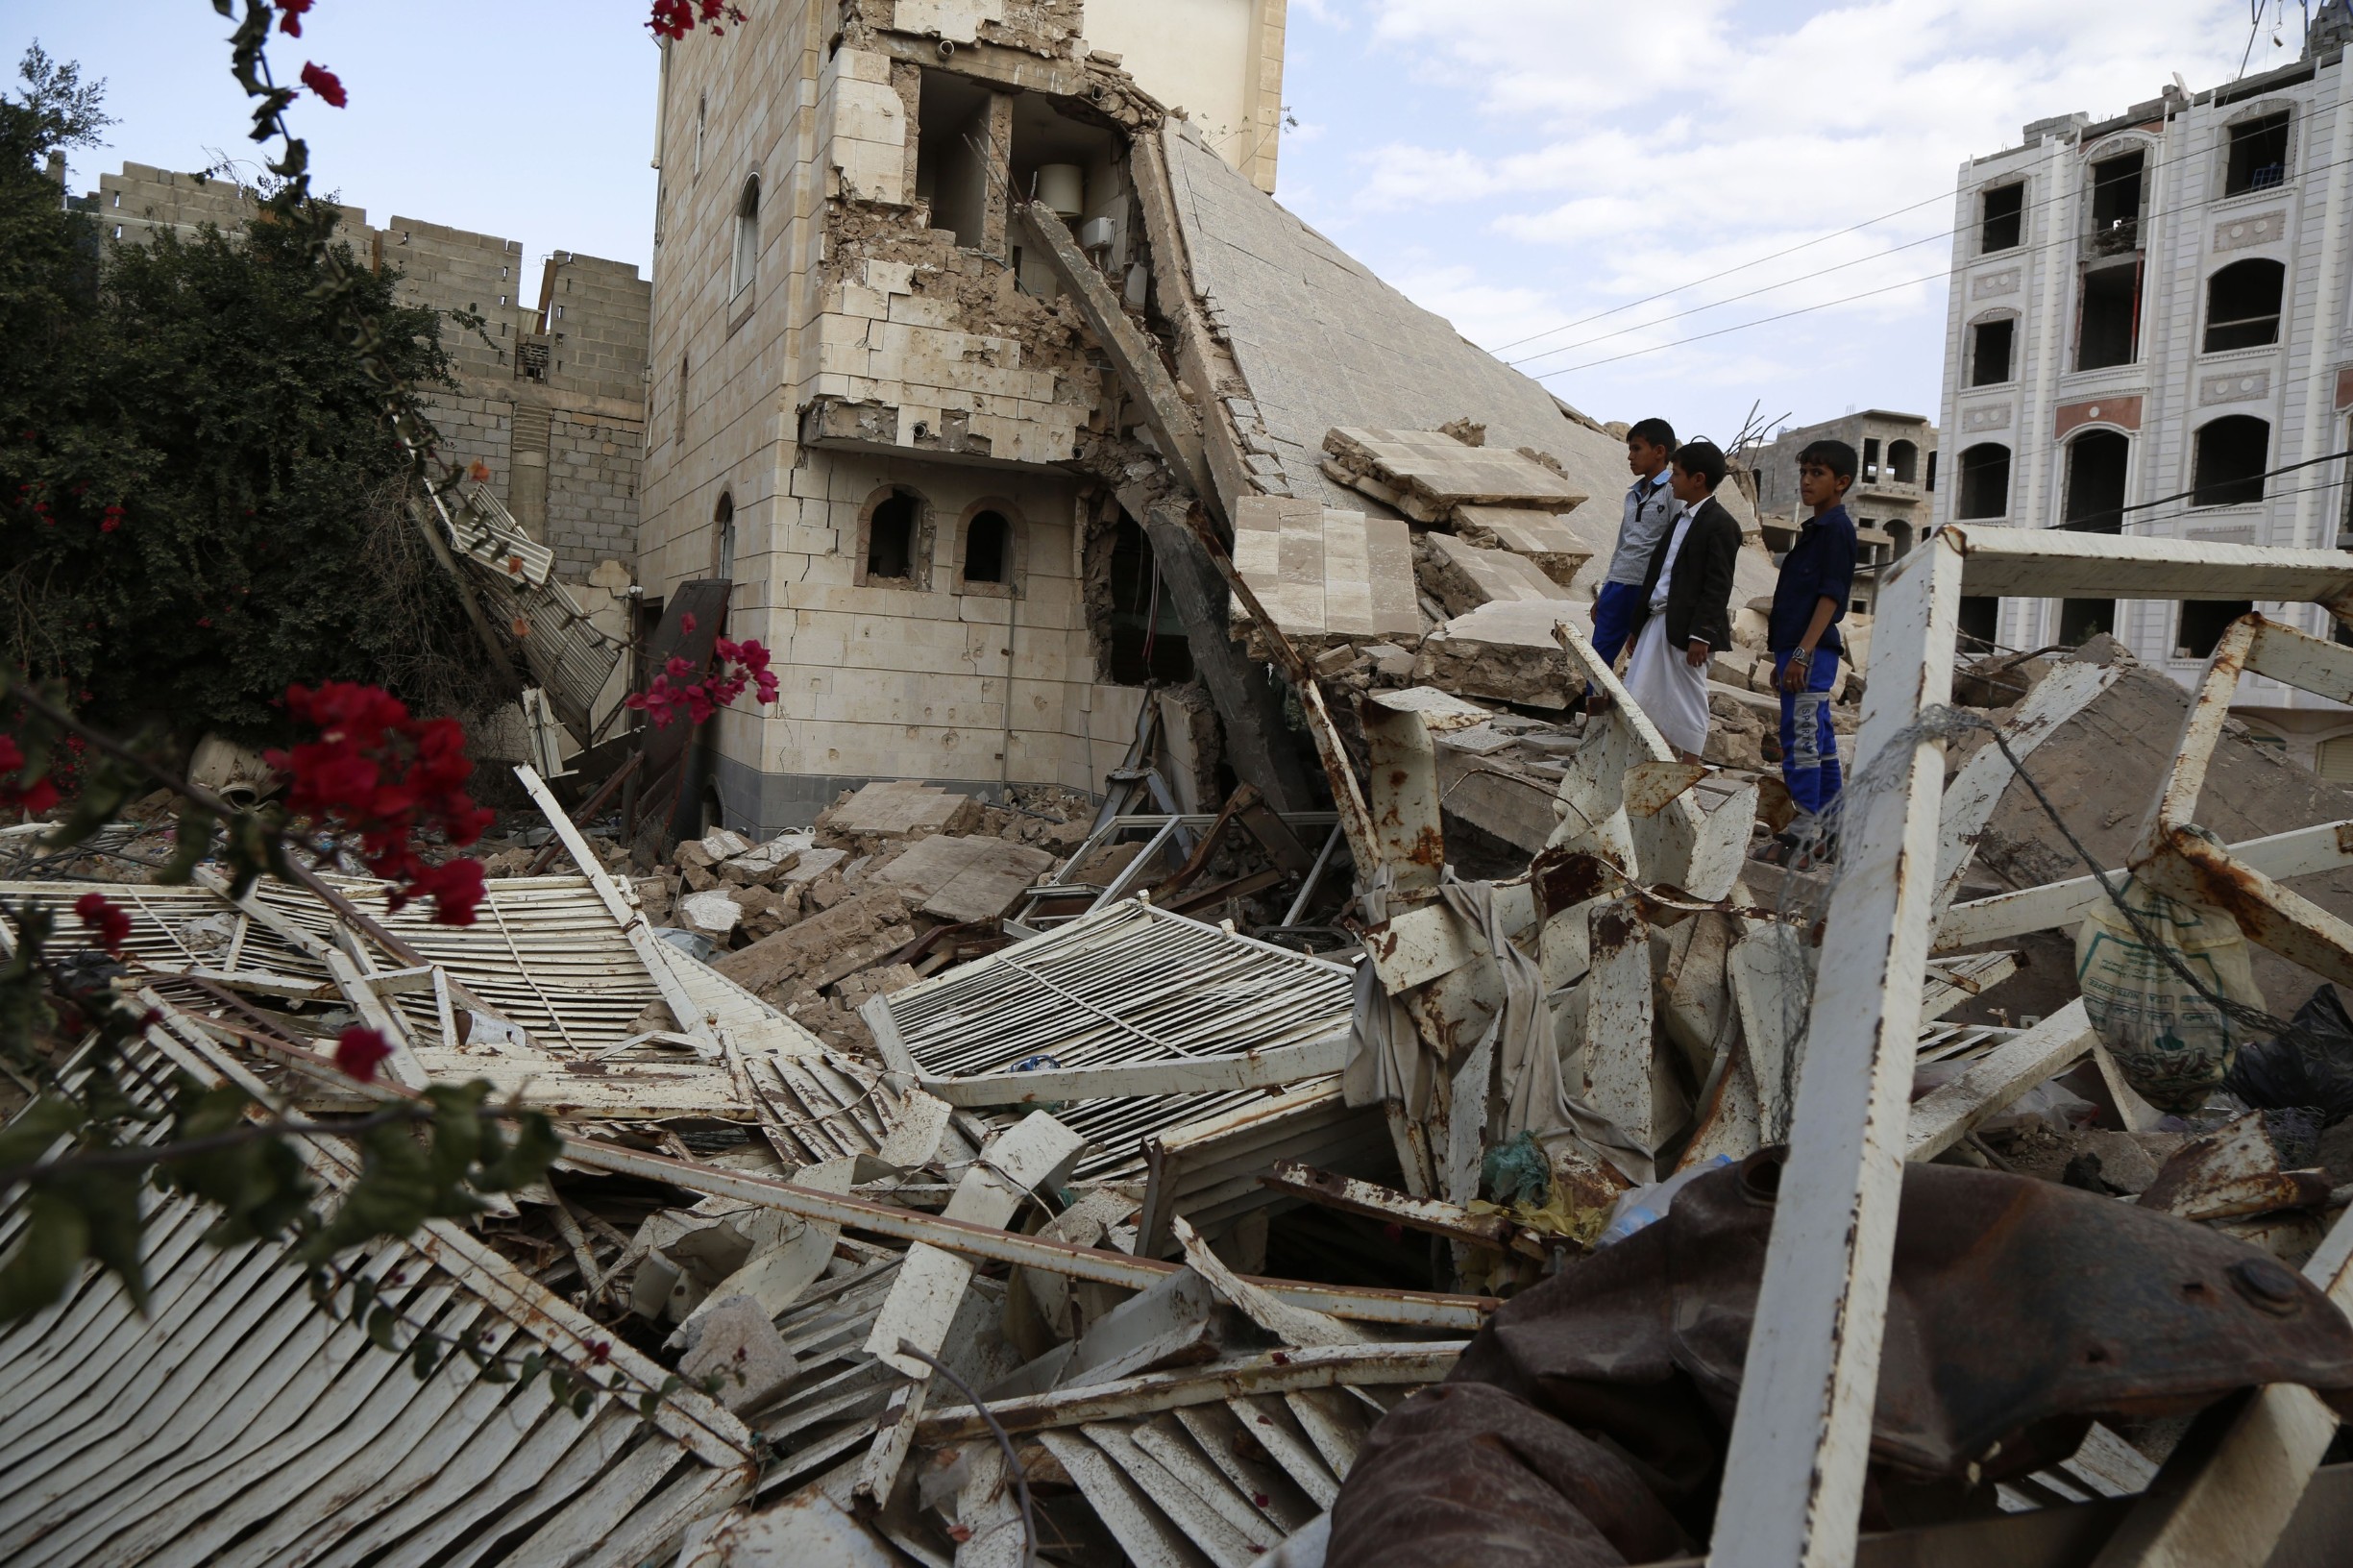 SANAA, Feb. 14, 2020  Children stand on rubble of a destroyed building in Sanaa, Yemen, Feb.14, 2020. Yemen has been mired in a civil war since late 2014, which has left thousands of civilians dead and more than 3 million internally displaced. (Photo by Mohammed Mohammed/Xinhua), Image: 498602781, License: Rights-managed, Restrictions: , Model Release: no, Credit line: Xinhua / Zuma Press / Profimedia